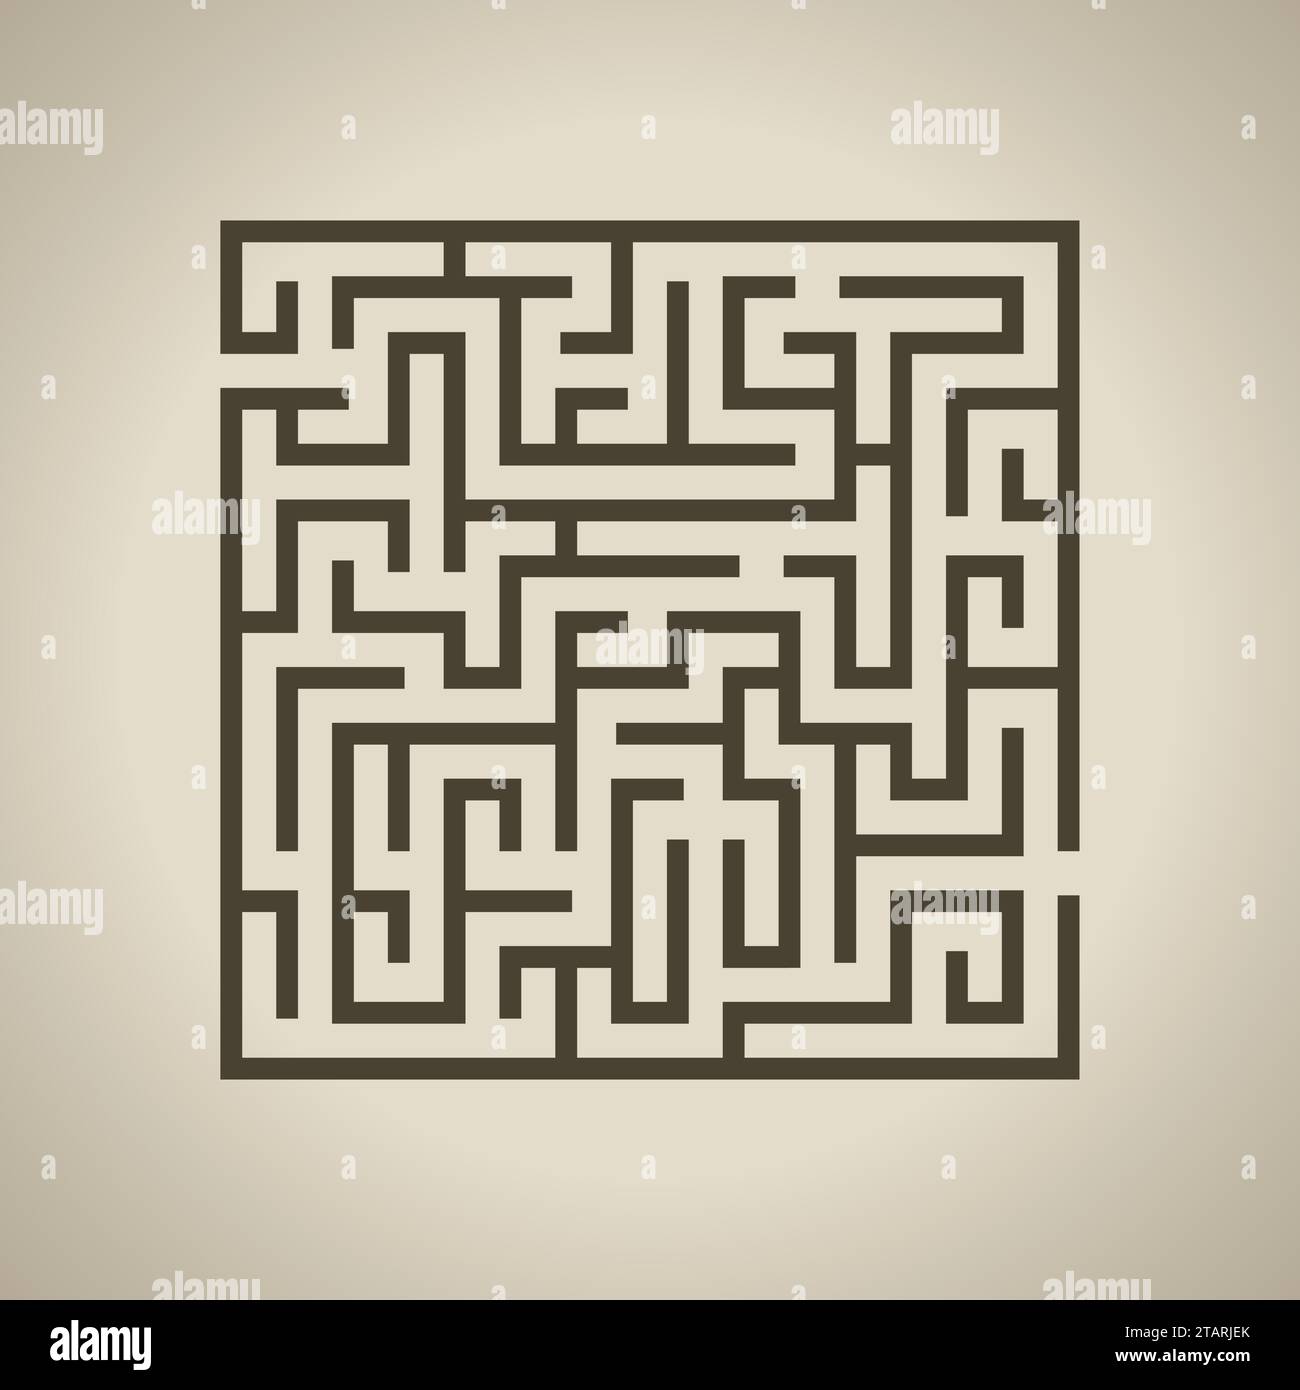 Vector illustration of Maze or Labyrinth isolated on brown background. Stock Vector